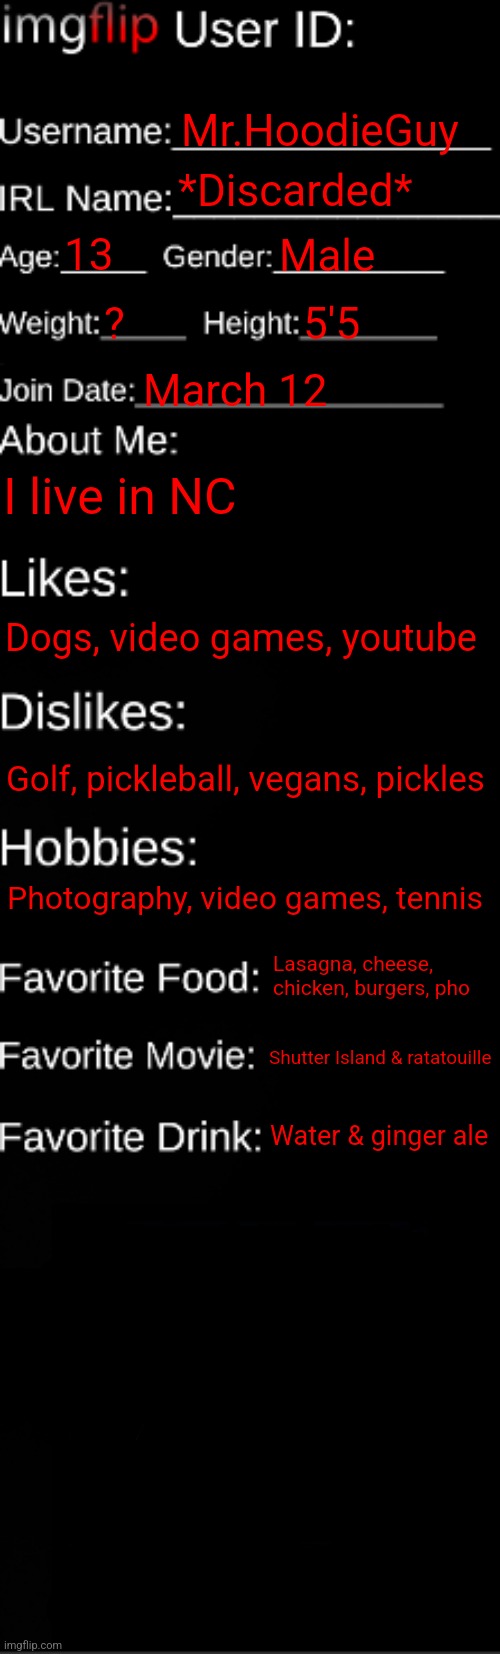 Finally made one of these after 3 years | Mr.HoodieGuy; *Discarded*; 13; Male; ? 5'5; March 12; I live in NC; Dogs, video games, youtube; Golf, pickleball, vegans, pickles; Photography, video games, tennis; Lasagna, cheese, chicken, burgers, pho; Shutter Island & ratatouille; Water & ginger ale | image tagged in imgflip id card | made w/ Imgflip meme maker